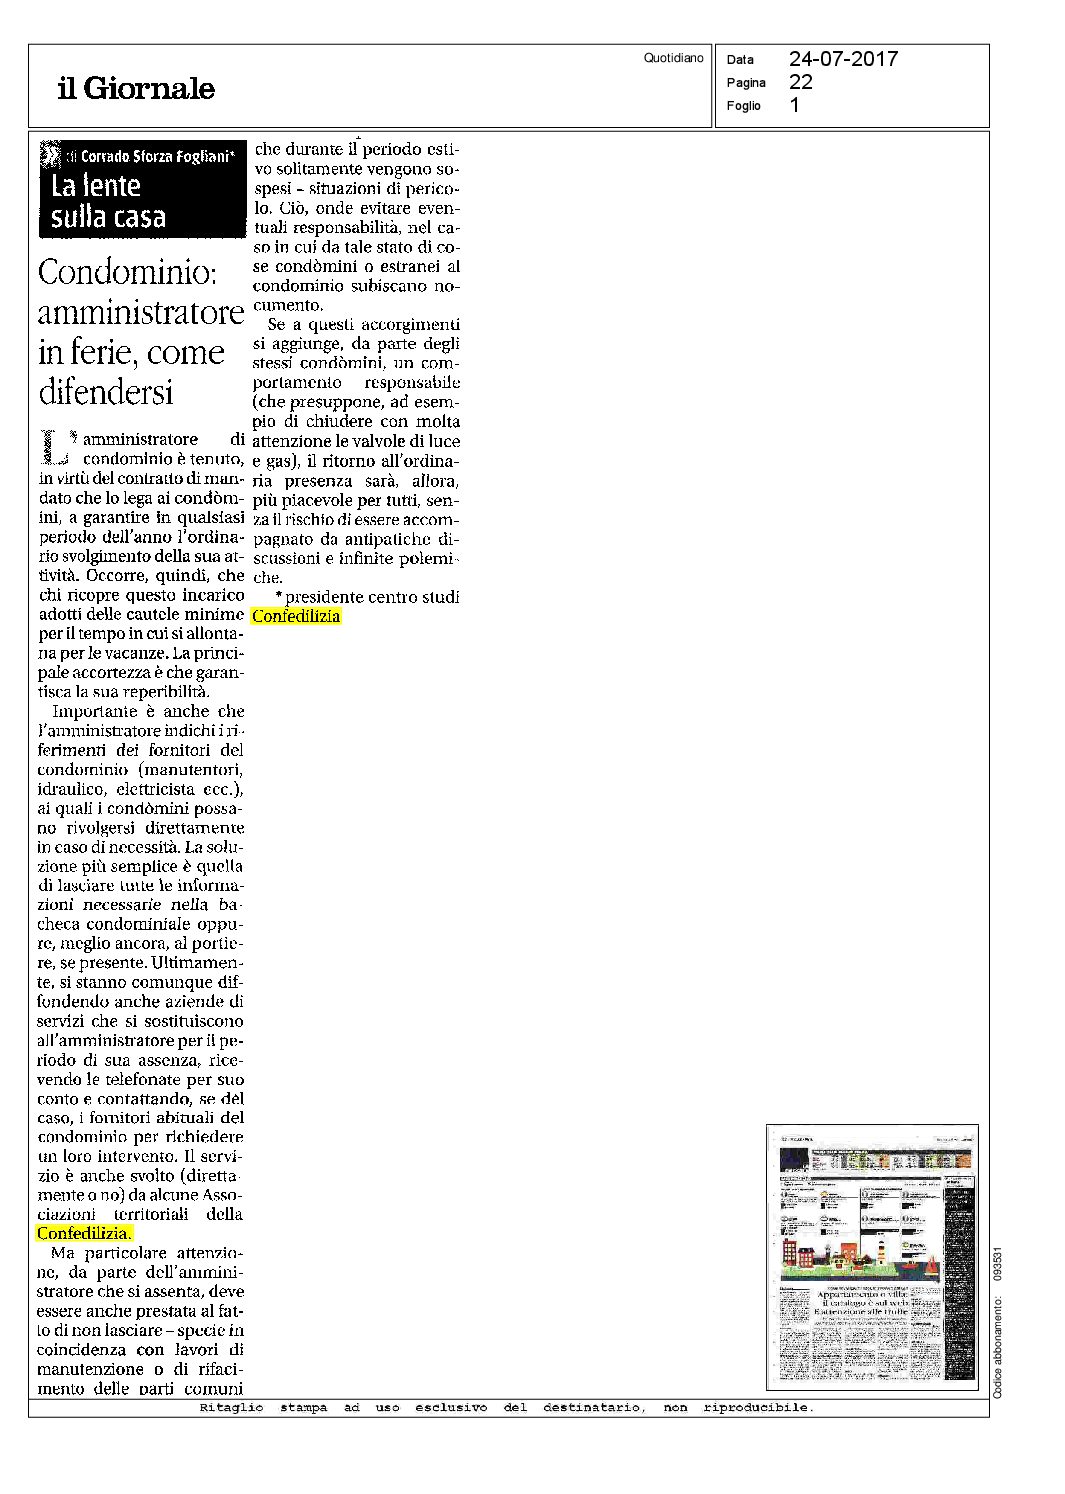 Giornale_24.7.17